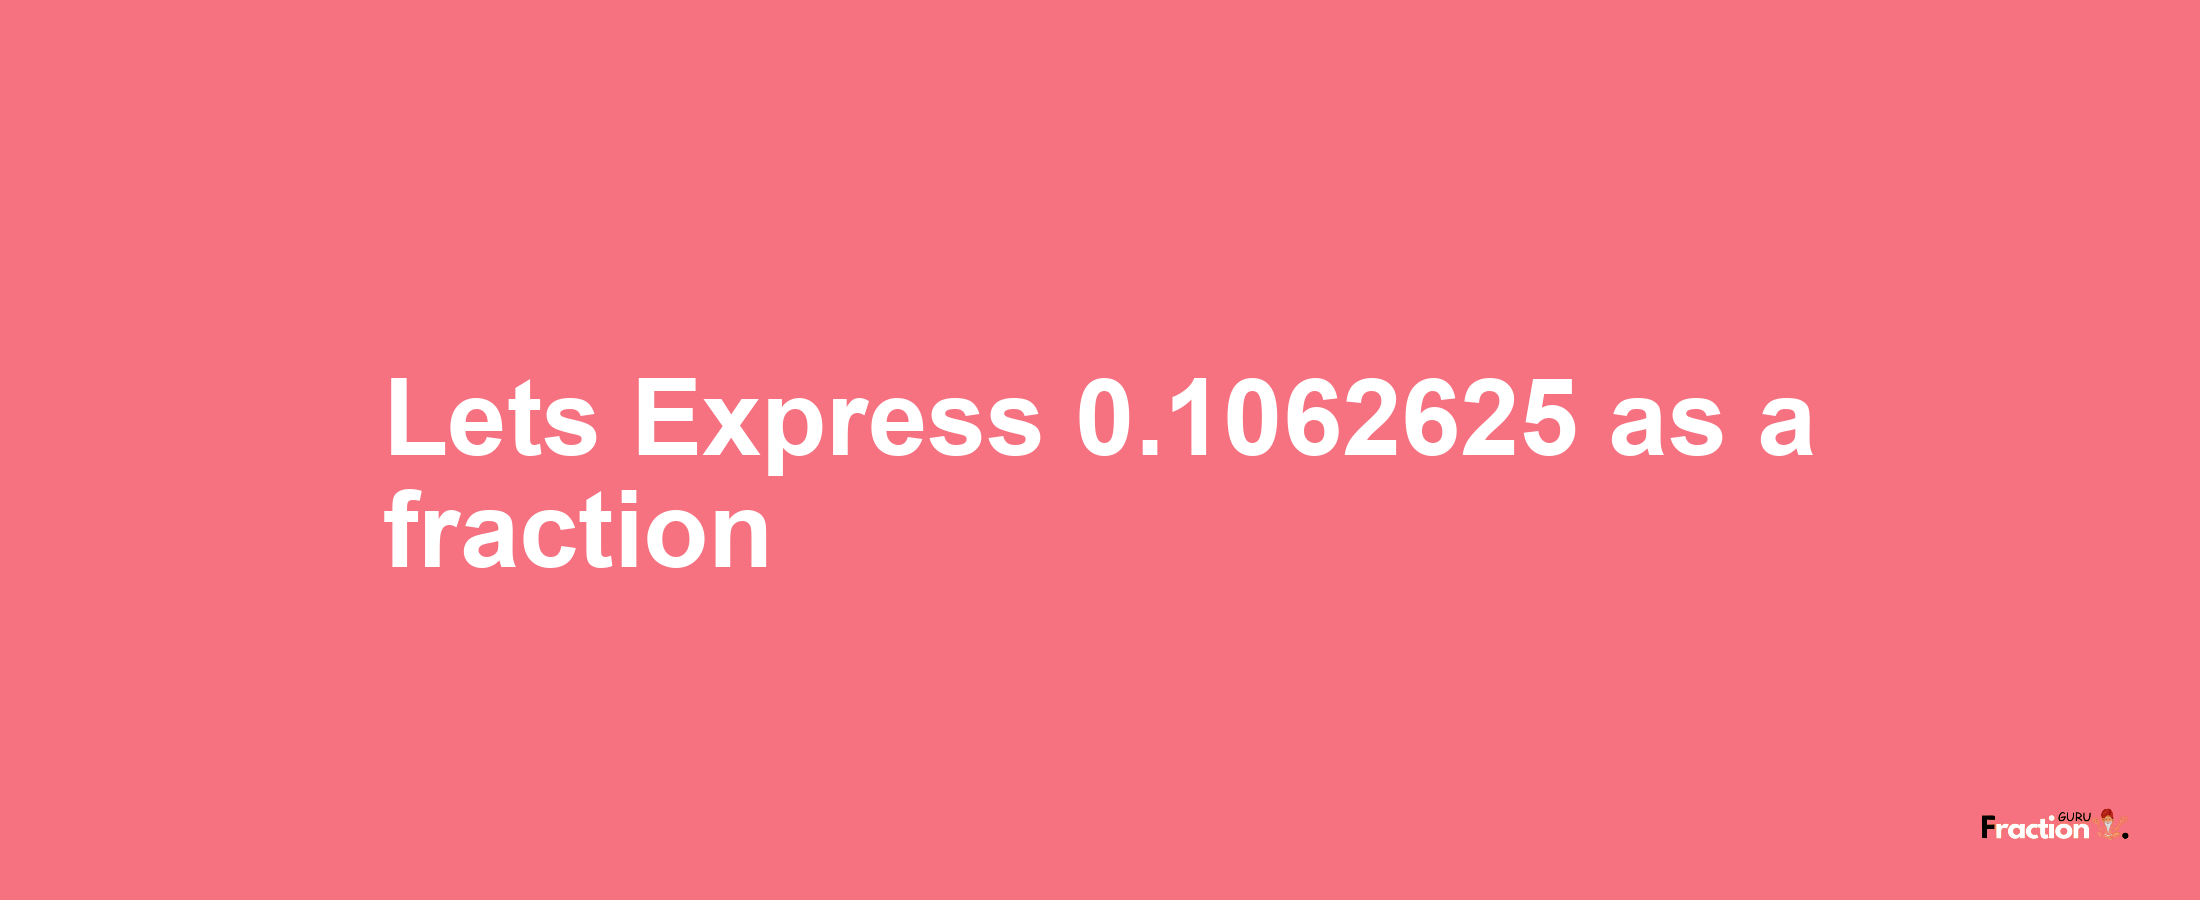 Lets Express 0.1062625 as afraction